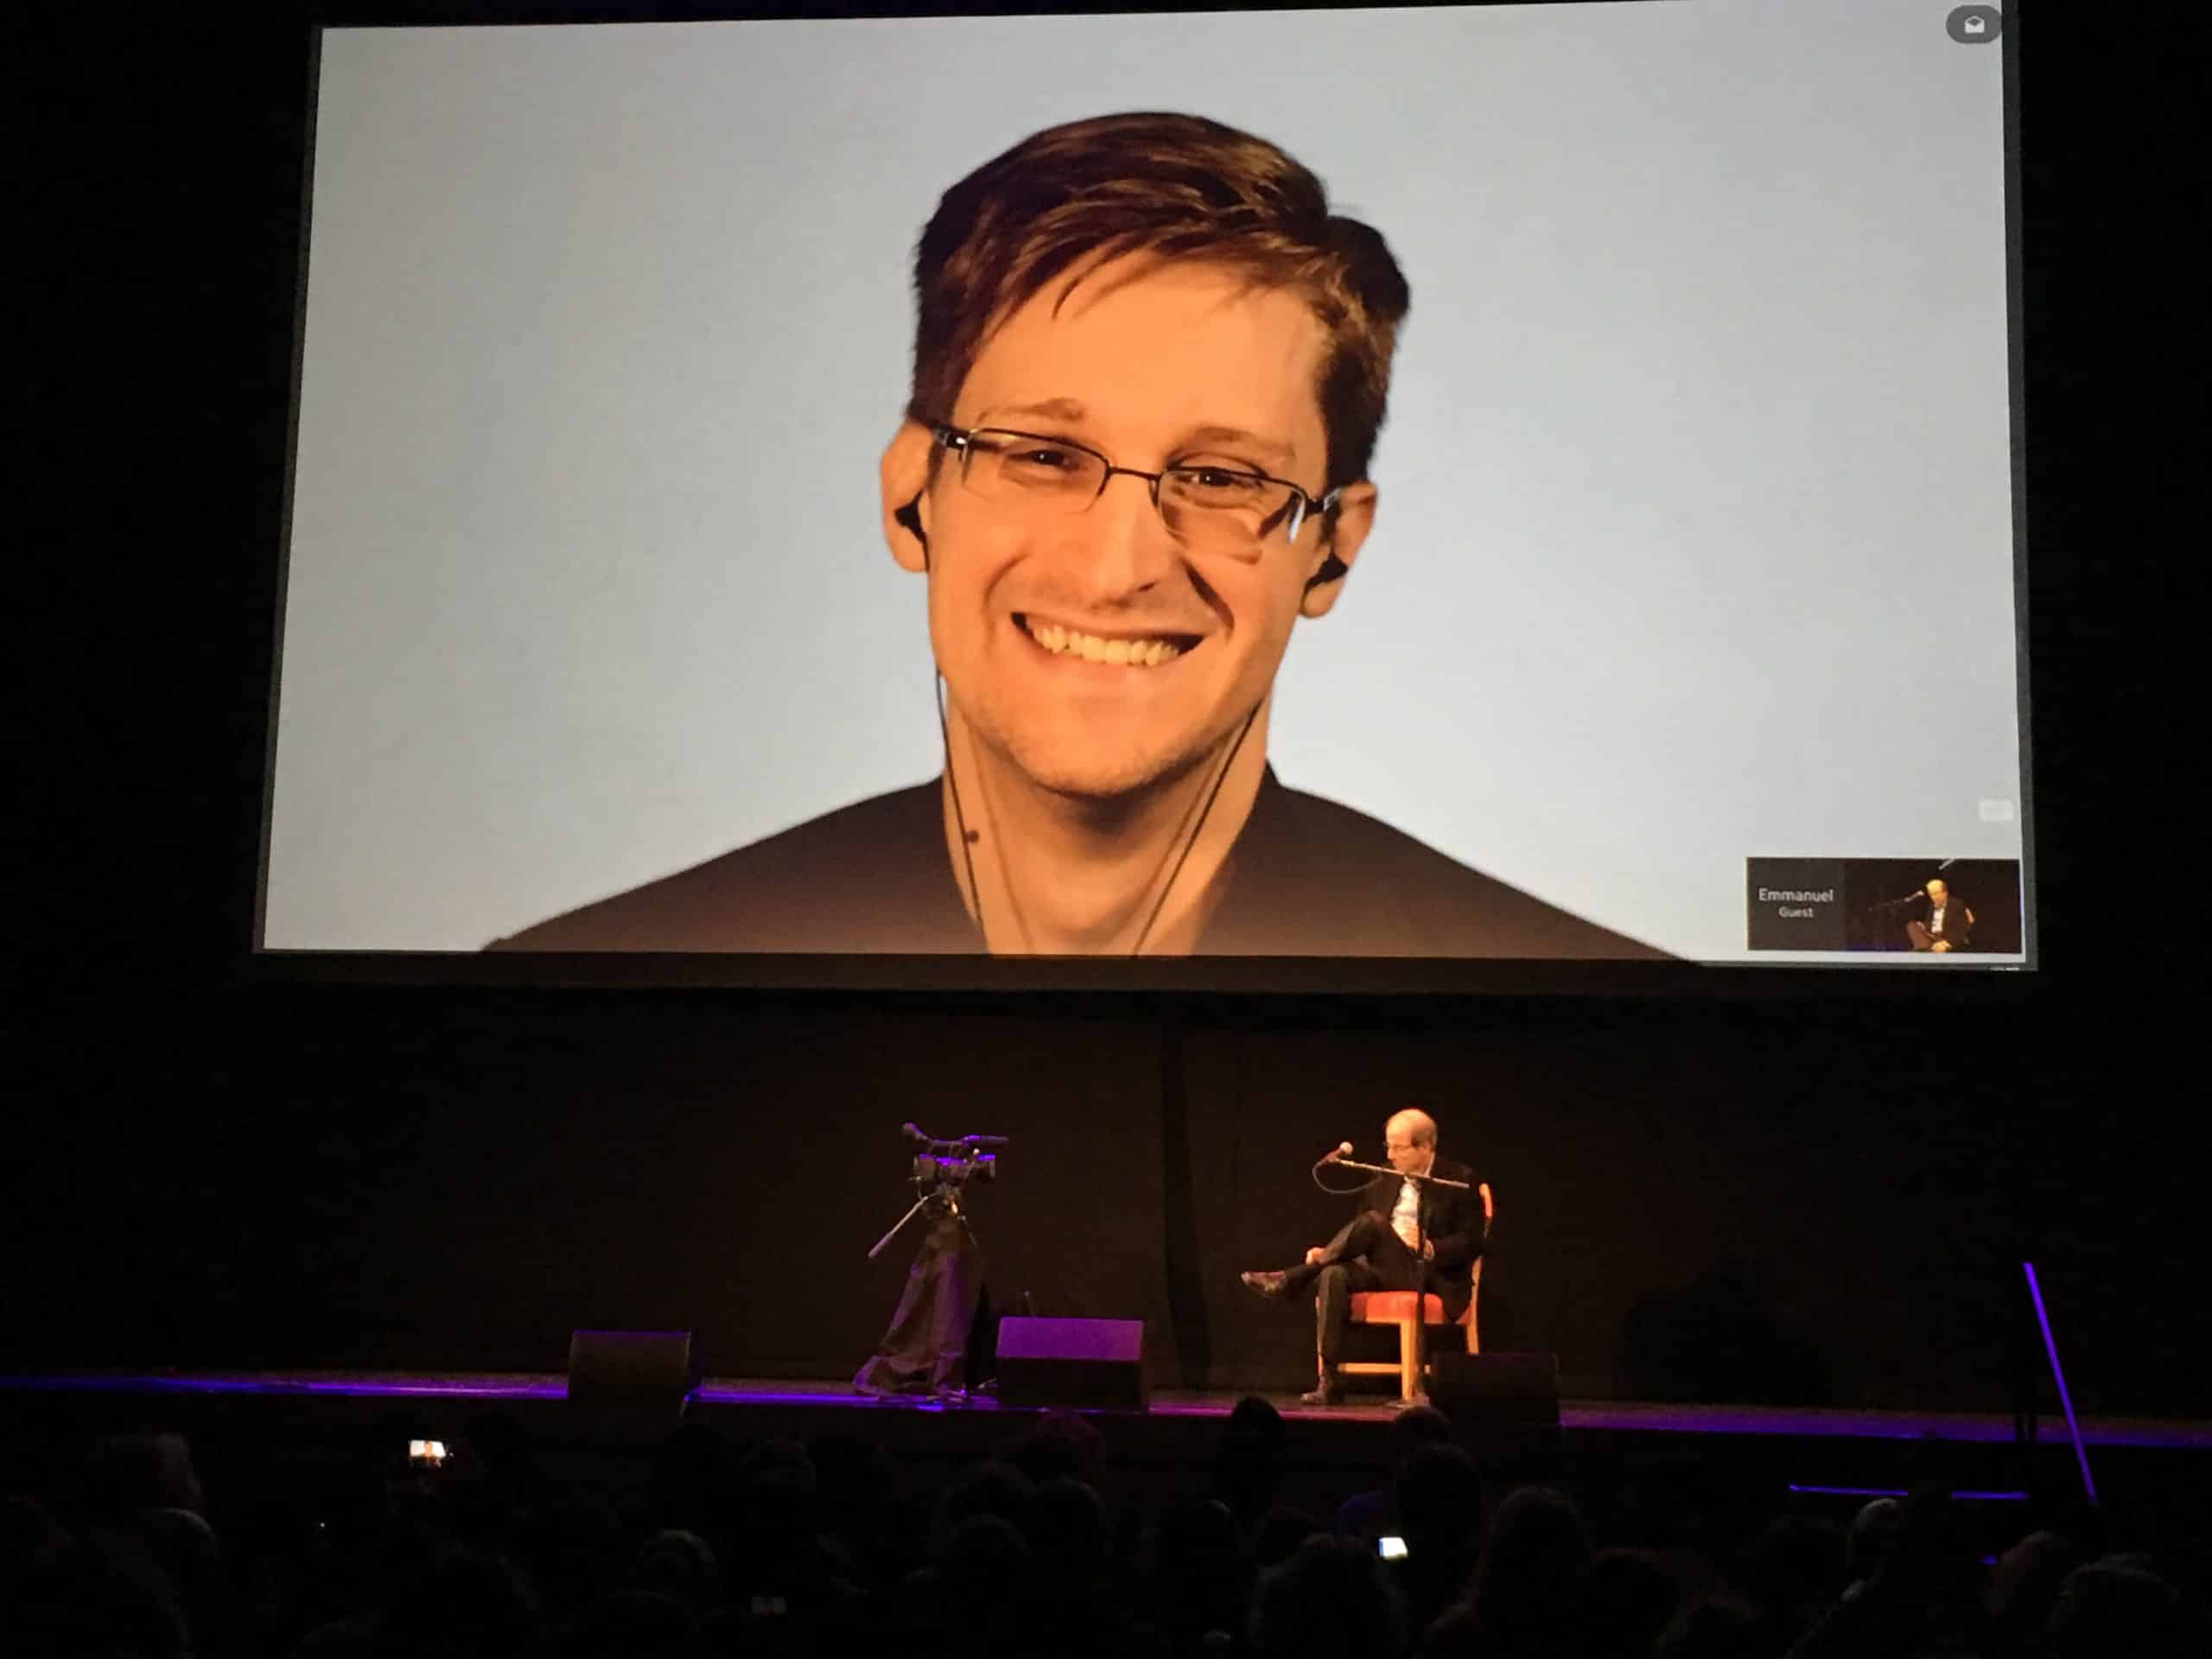 Edward Snowden 2017: Live on video in San Francisco